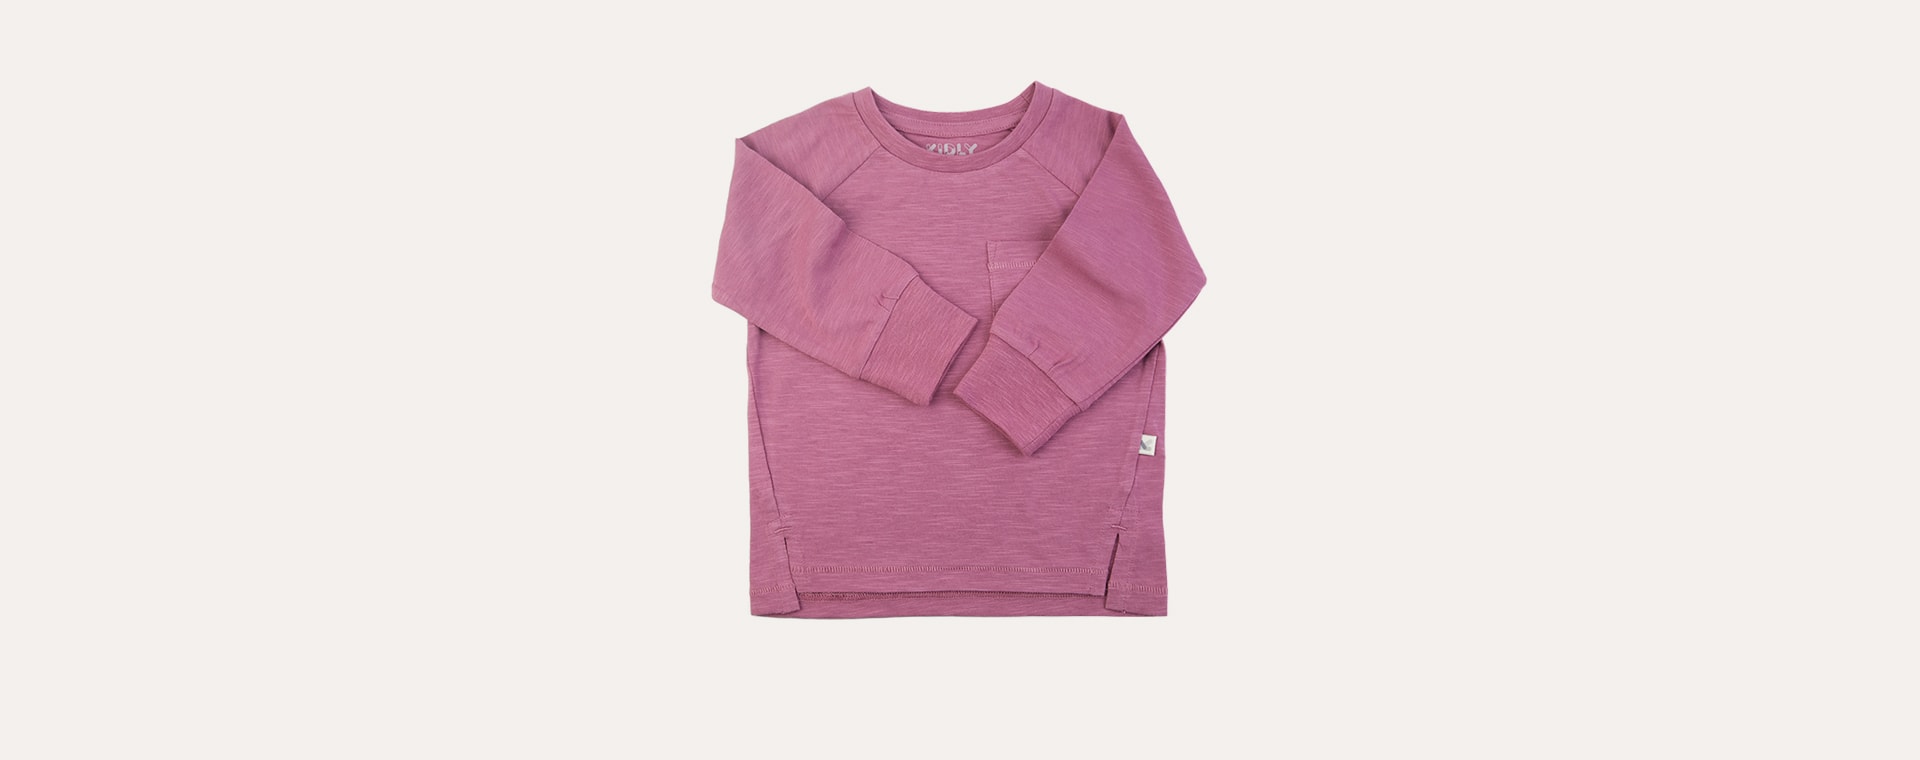 Berry KIDLY Label Perfect Long Sleeve Tee